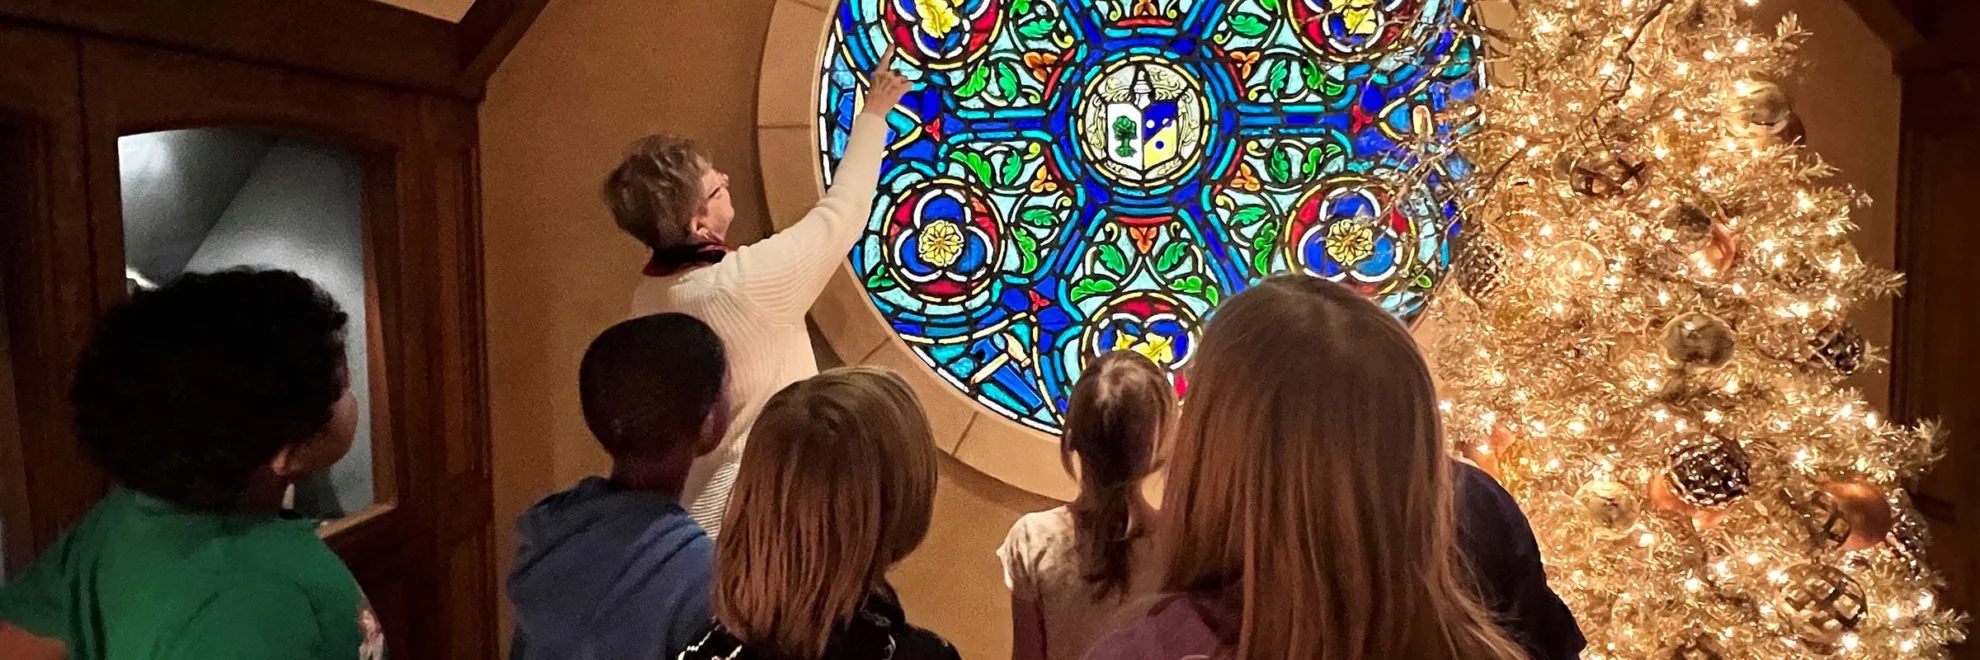 Children view a stained-glass window with a volunteer during the Christmas season.